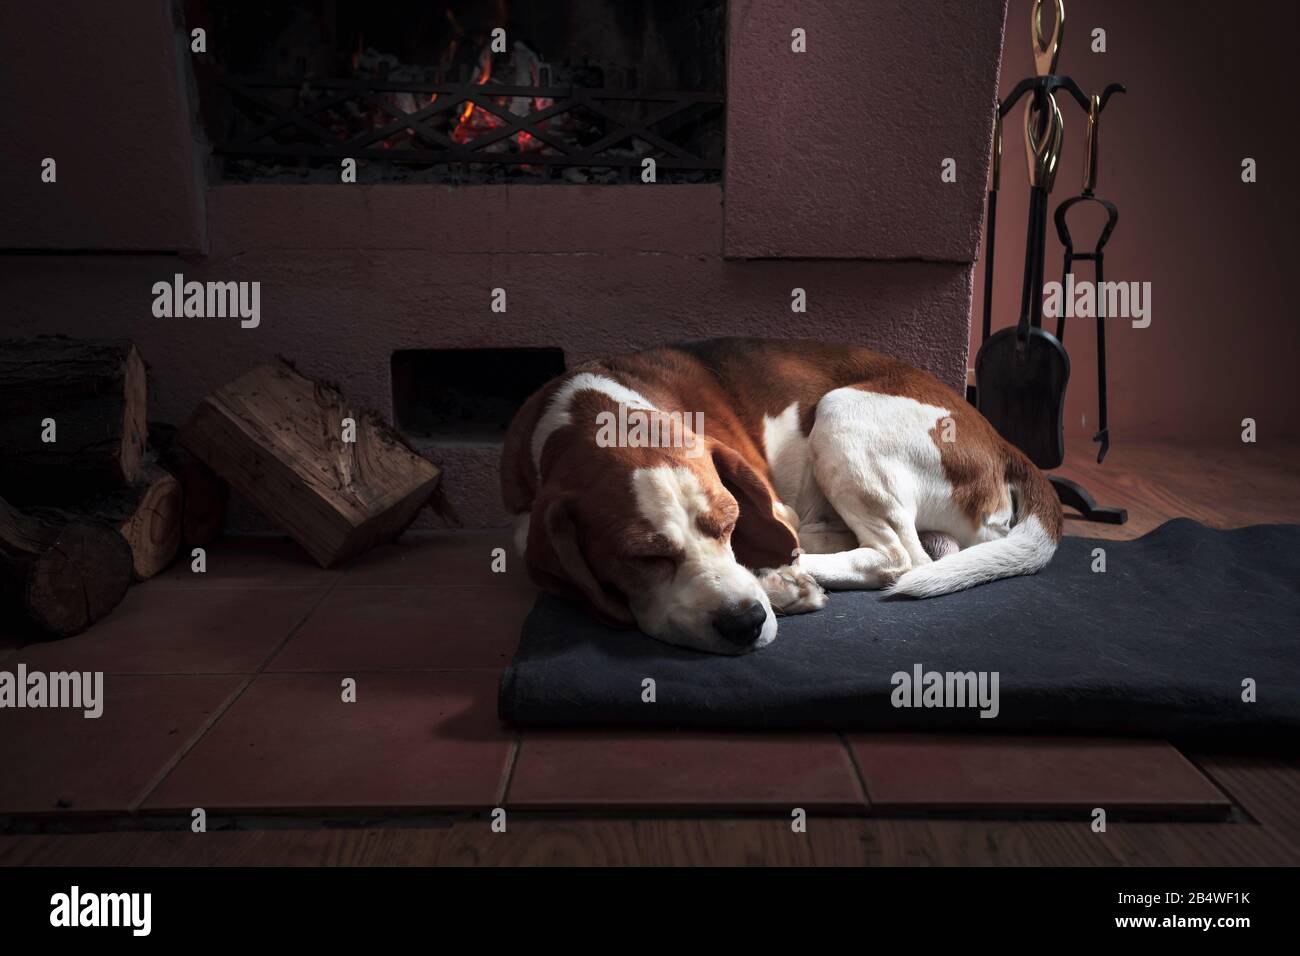 Tired dog sleeping on the rug by the fireplace. Adult thoroughbred Beagle. Stock Photo